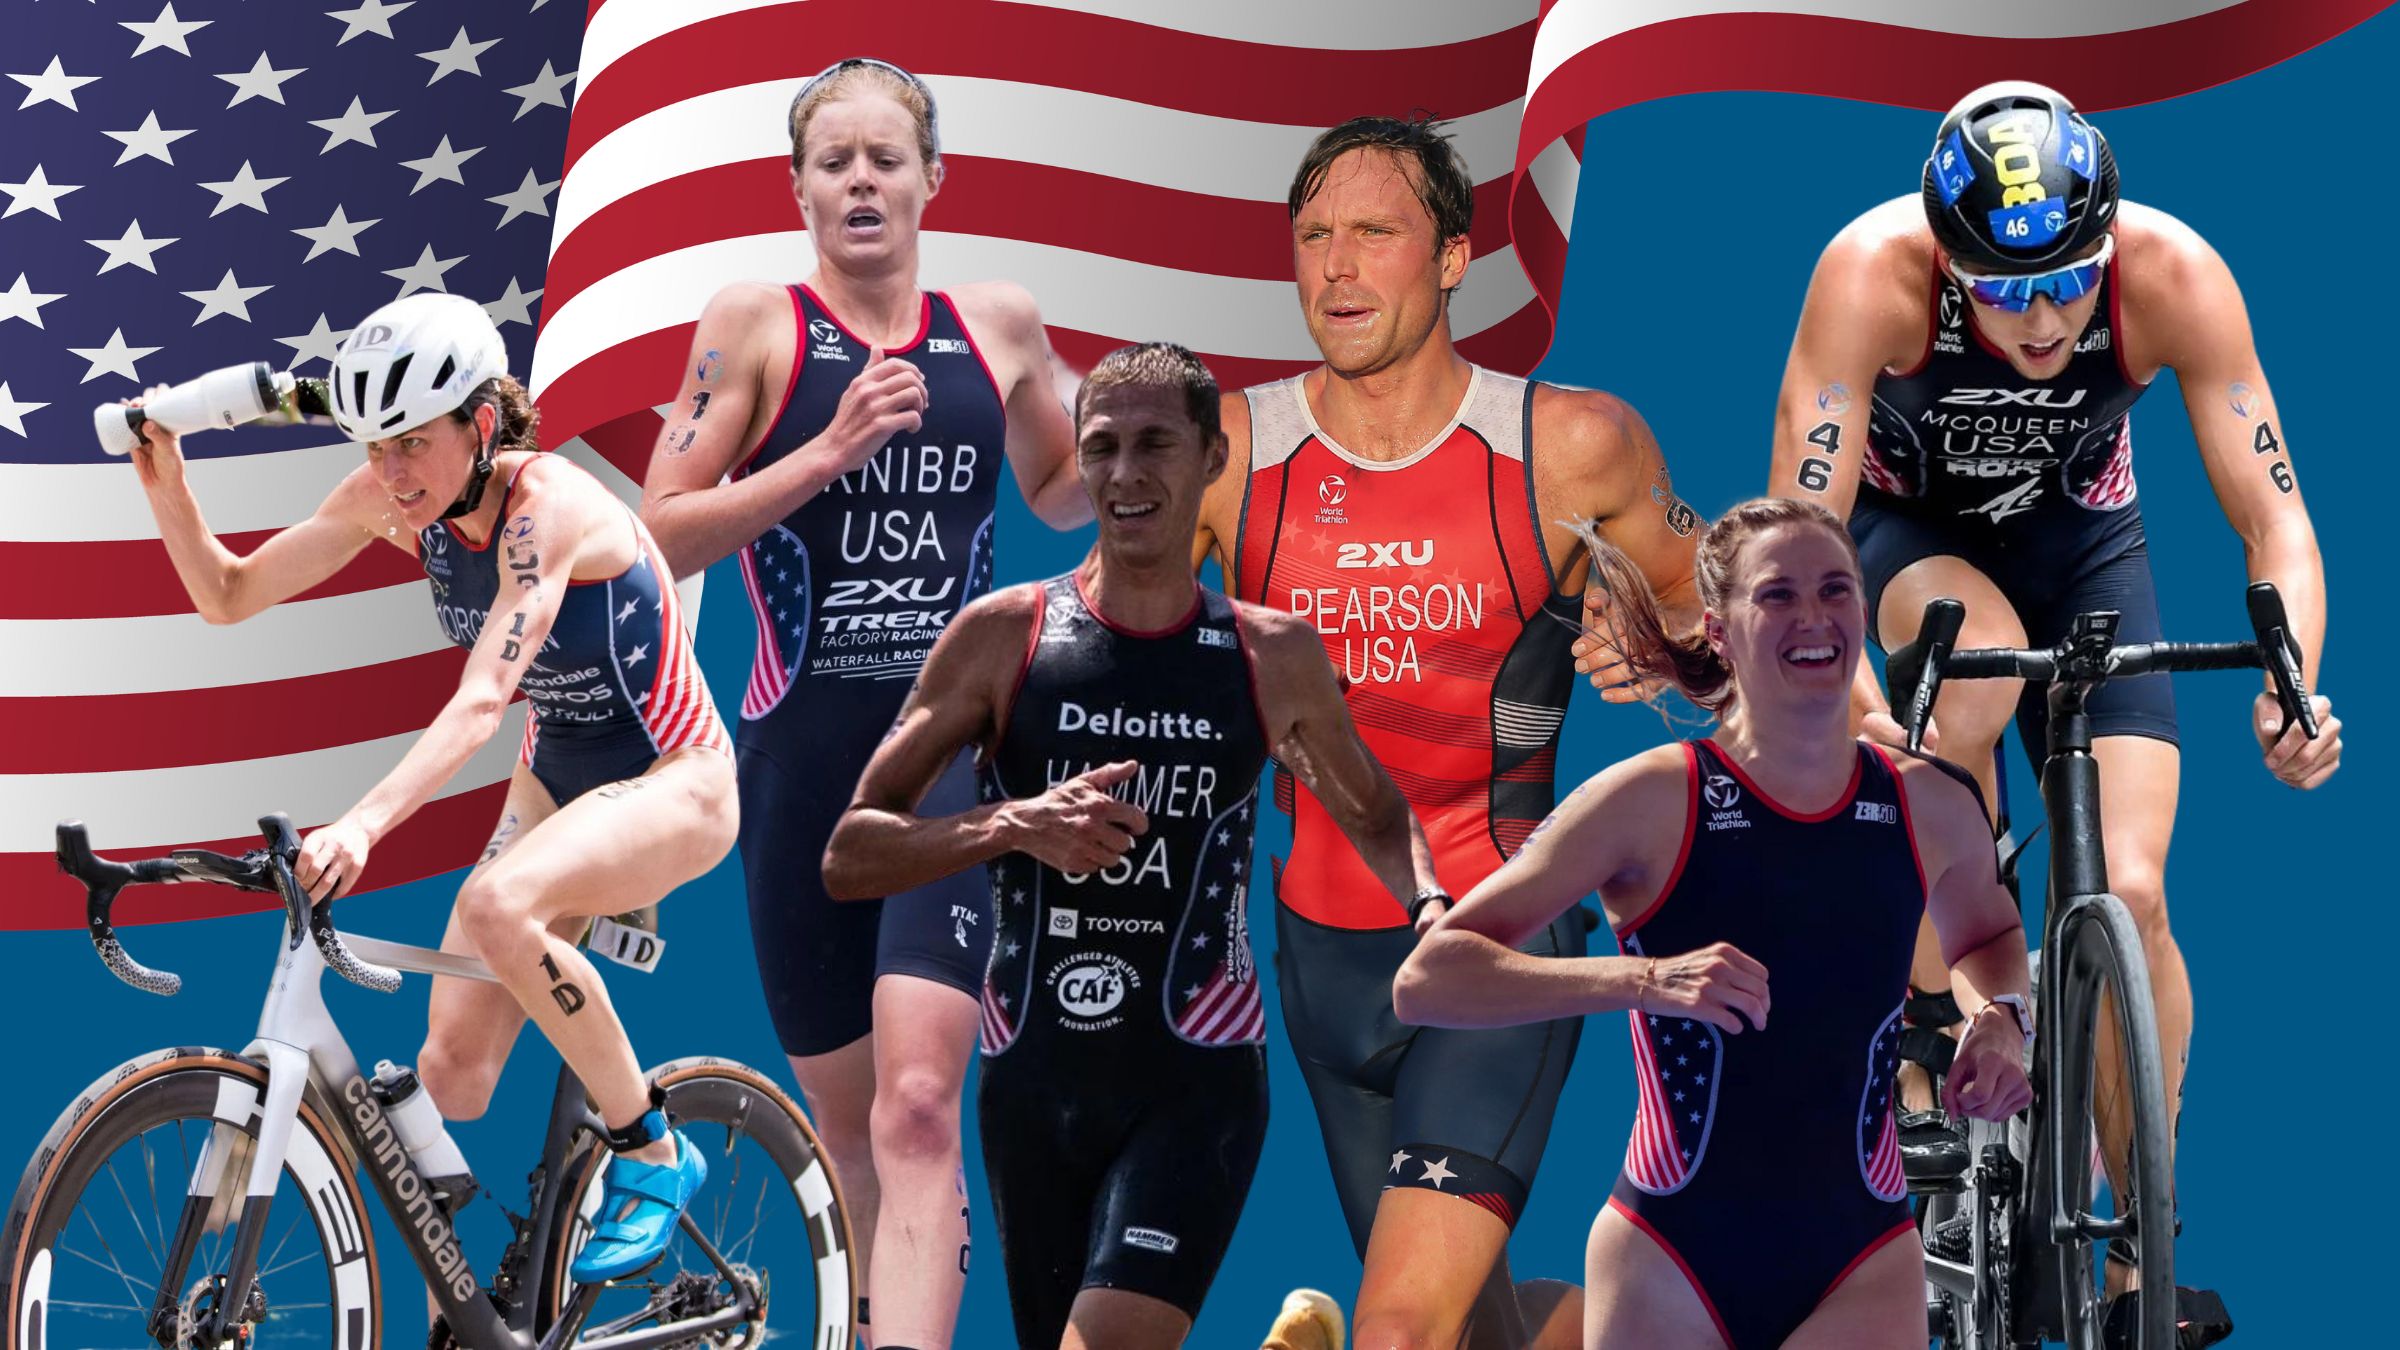 Meet the Contenders for the Paris 2024 U.S. Olympic and Paralympic